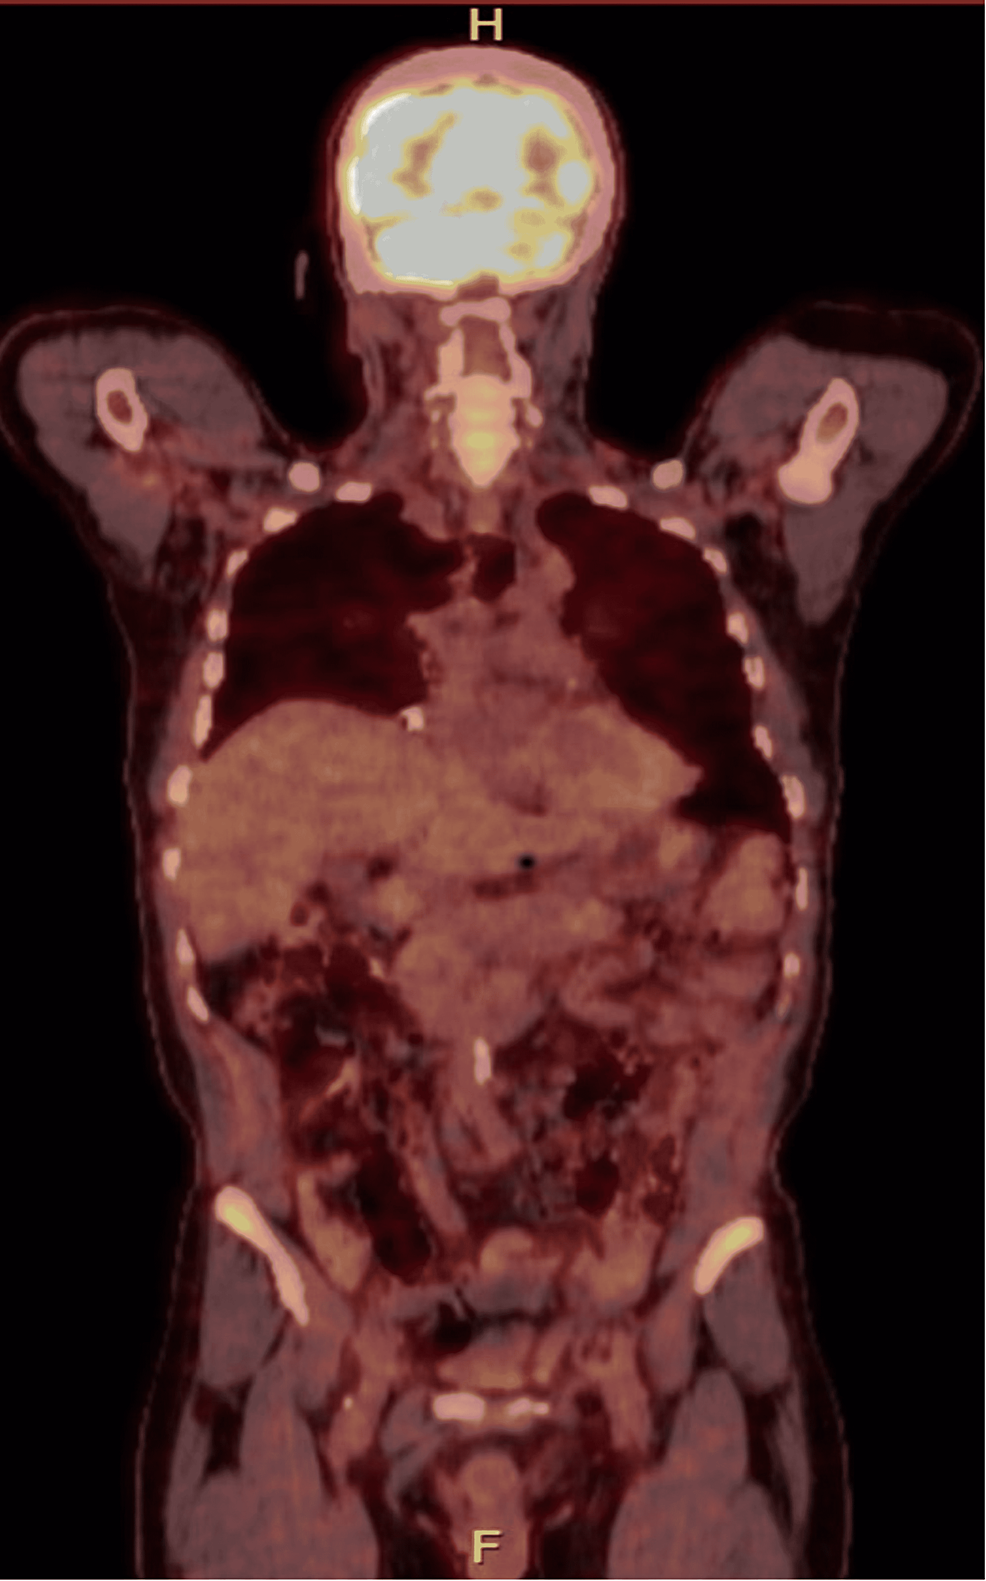 Coronal-section-of-PET-CT-scan-showing-small-right-lower-lobe-0.6-cm-nodule-with-SUVmax-1.3.-The-described-diffusely-increased-FDG-activity-of-the-bone-marrow-is-seen-in-the-iliac-bone.